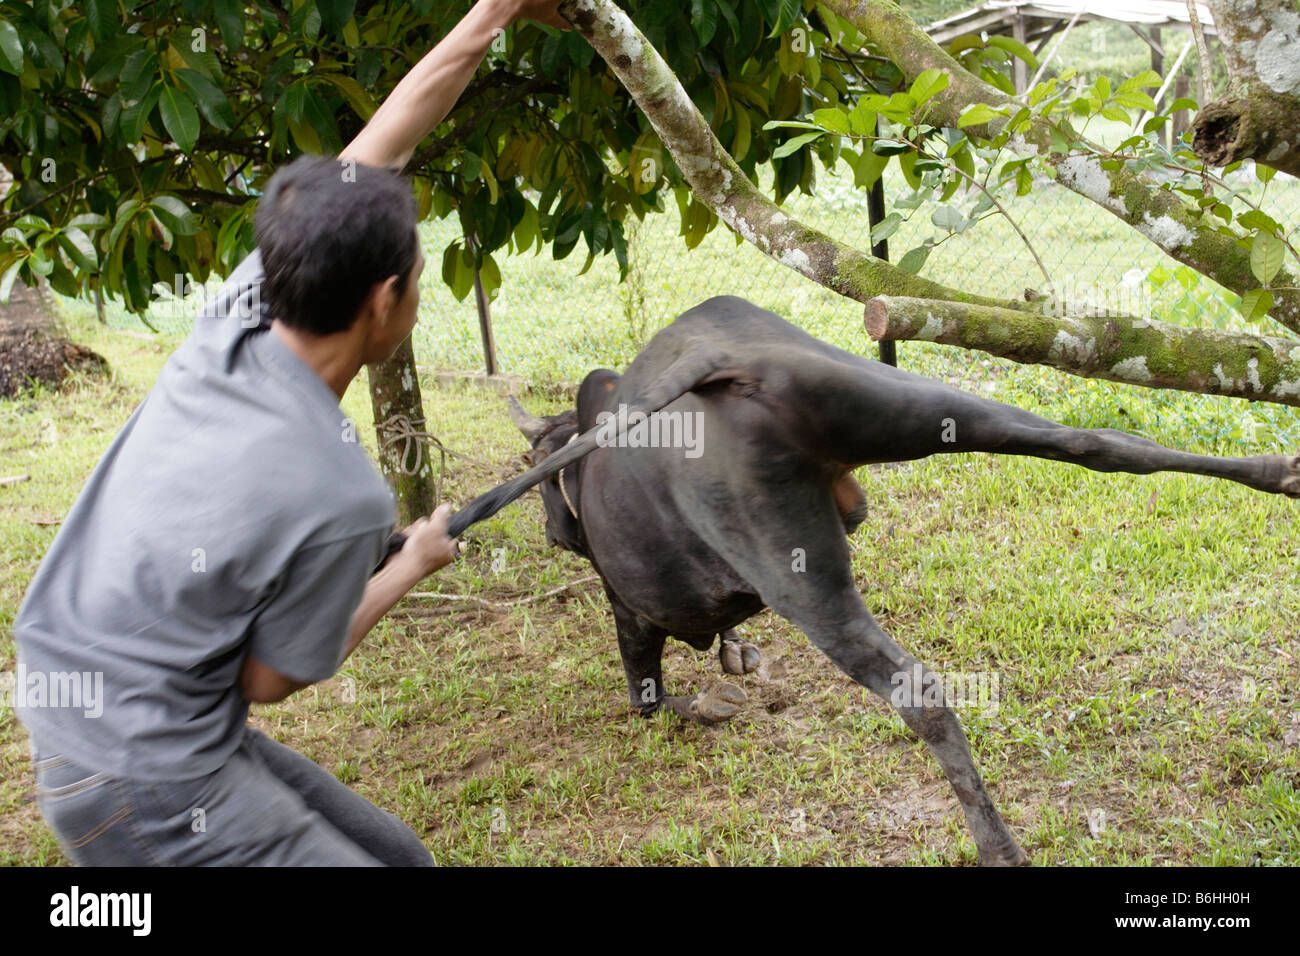 Pulling down a cow for slaughter in Malaysia. Stock Photo